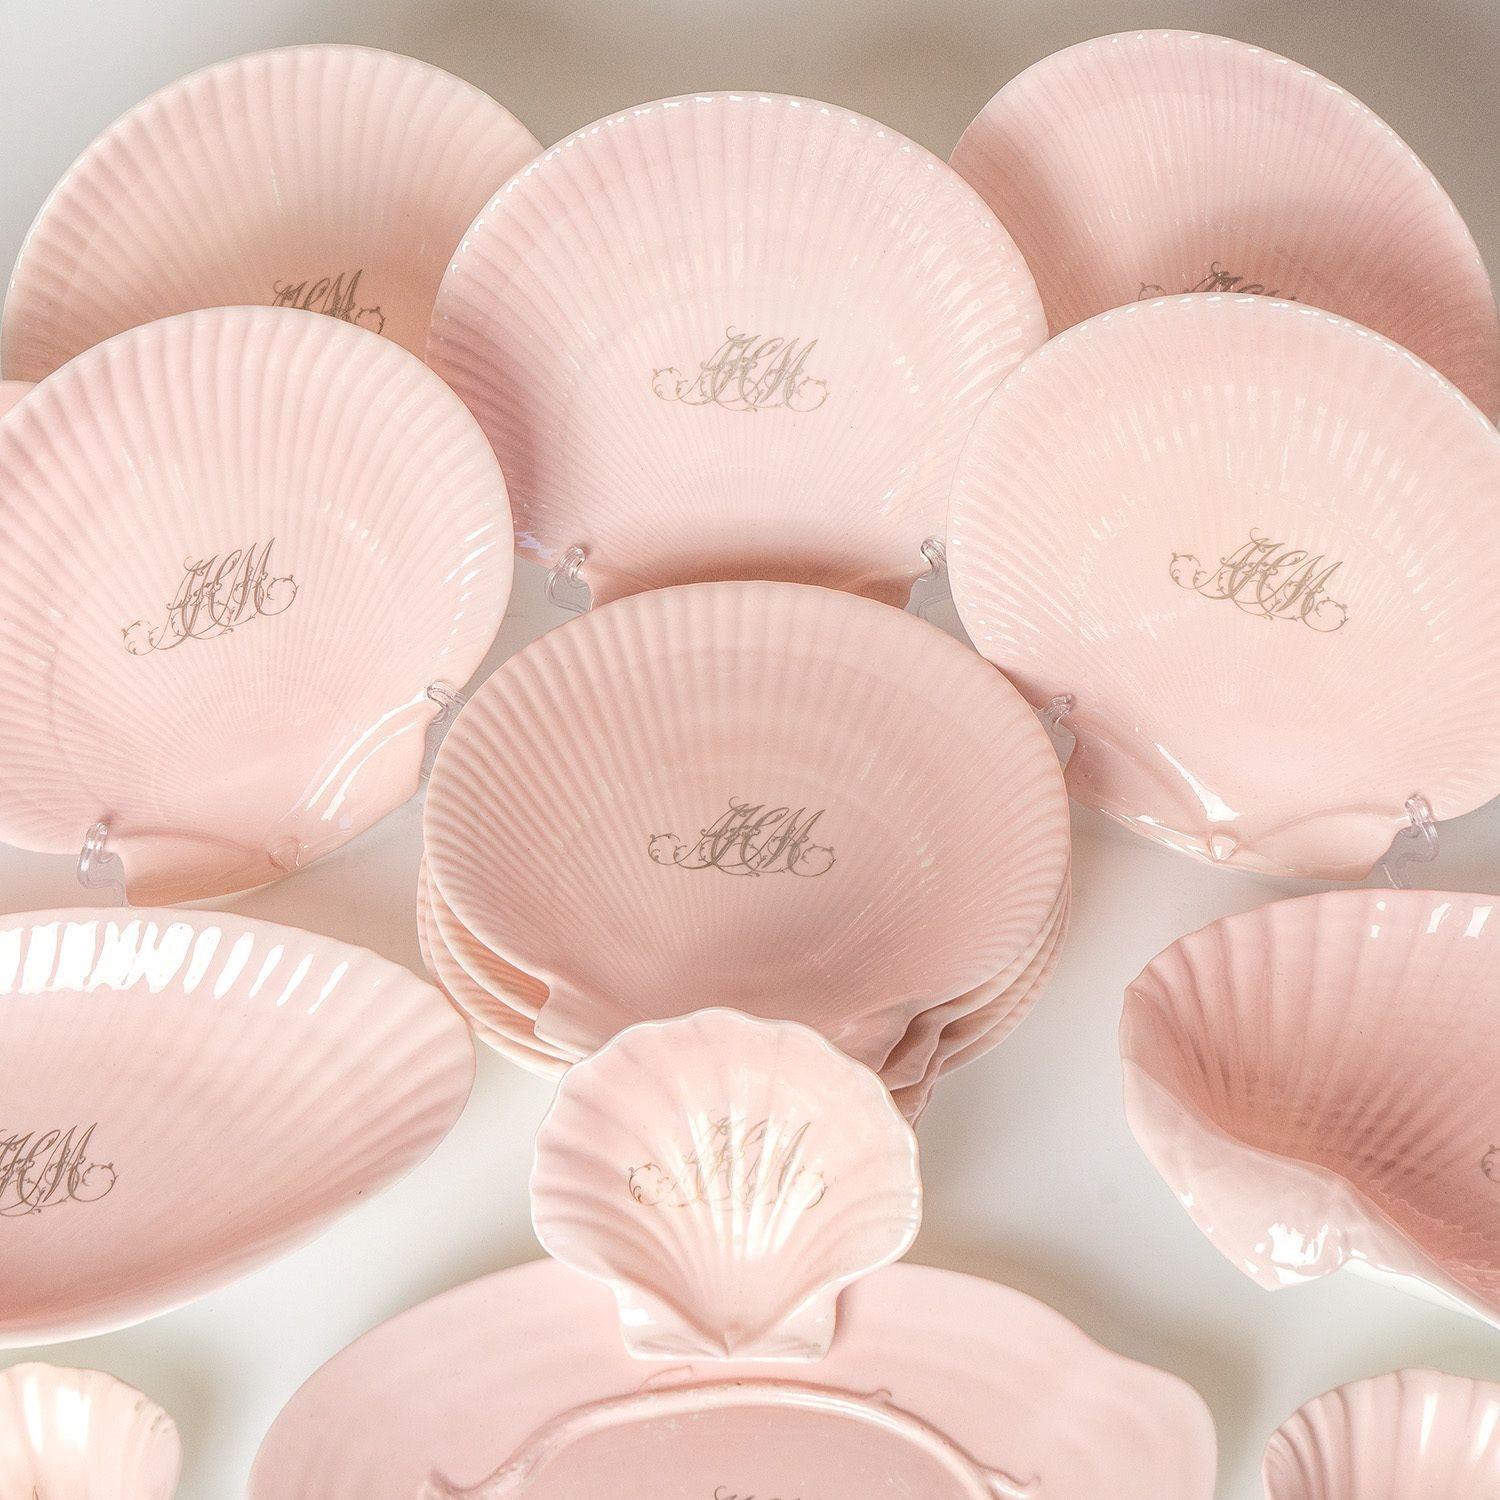 Victorian Pink Porcelain 'Nautilus' Dessert Service by Wedgwood for John Mortlock, 1880s For Sale